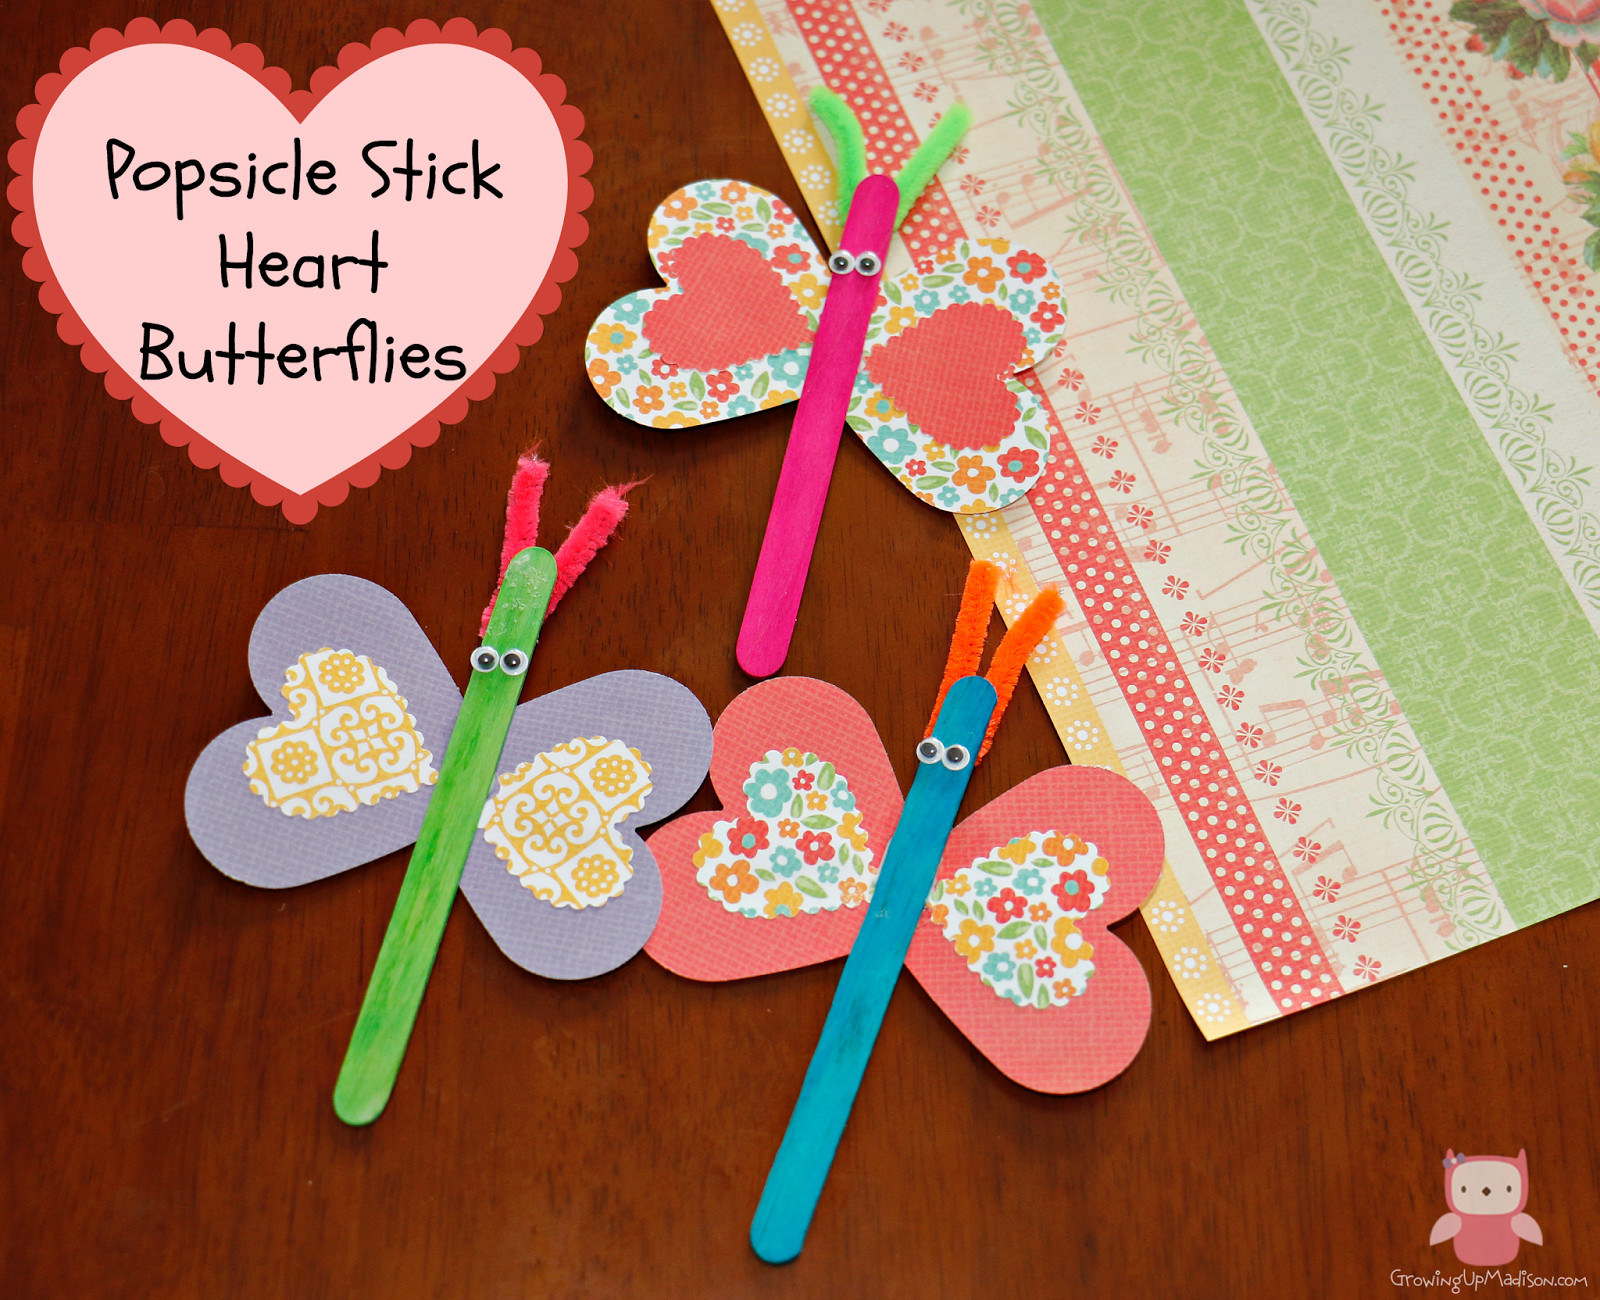 Popsicle Stick Crafts For Kids
 Popsicle Stick Heart Butterflies An Easy Valentine s Day